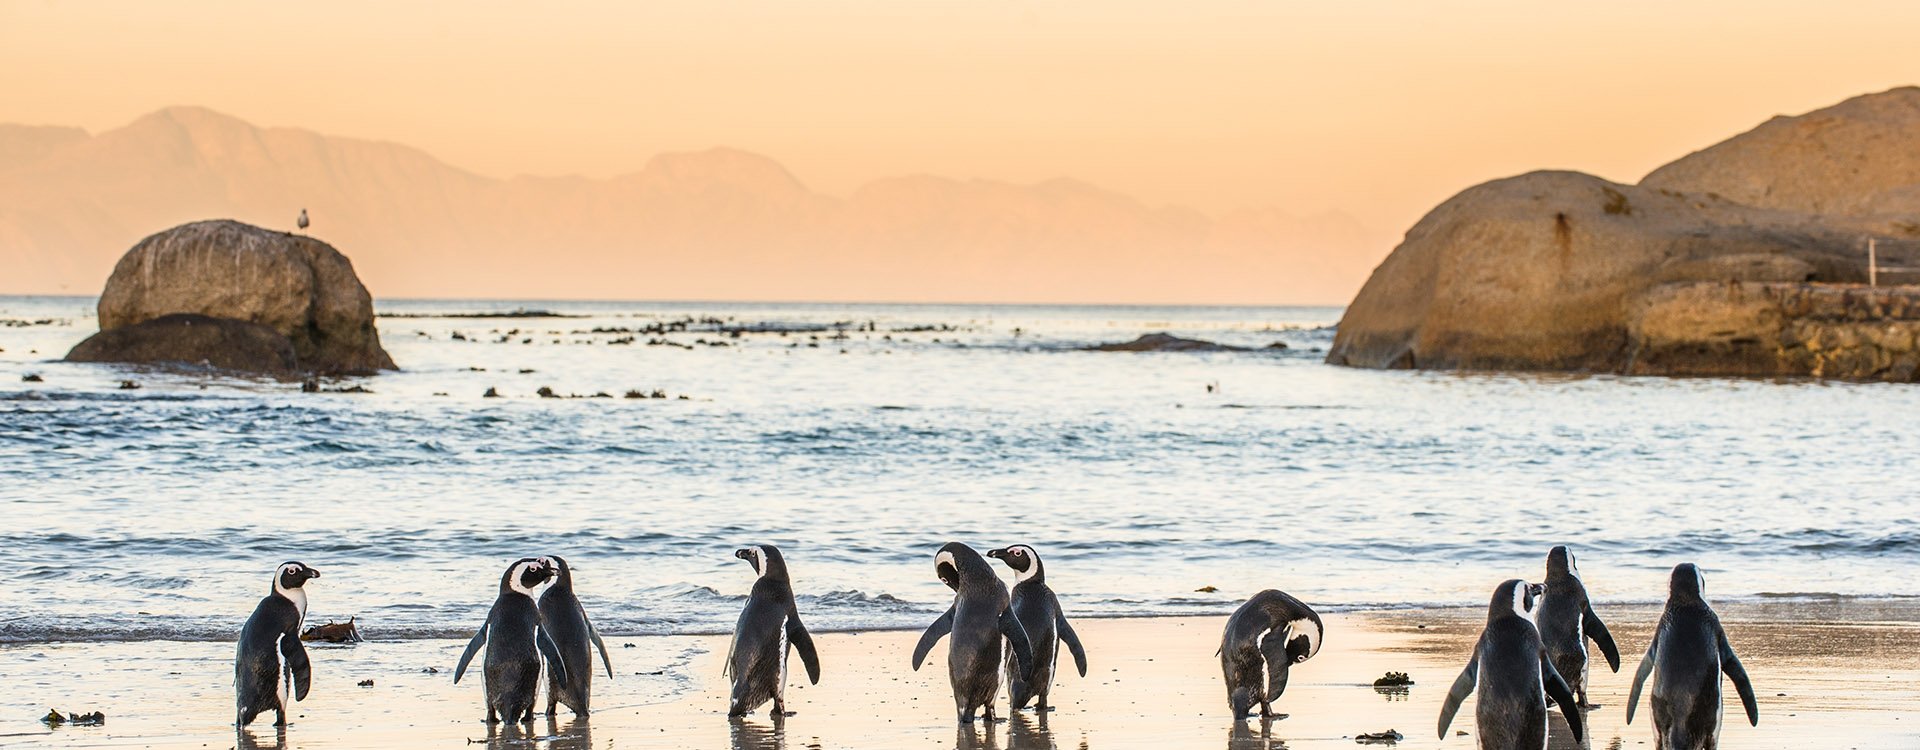 African penguins on the sandy coast in sunset.  Cape town, South Africa